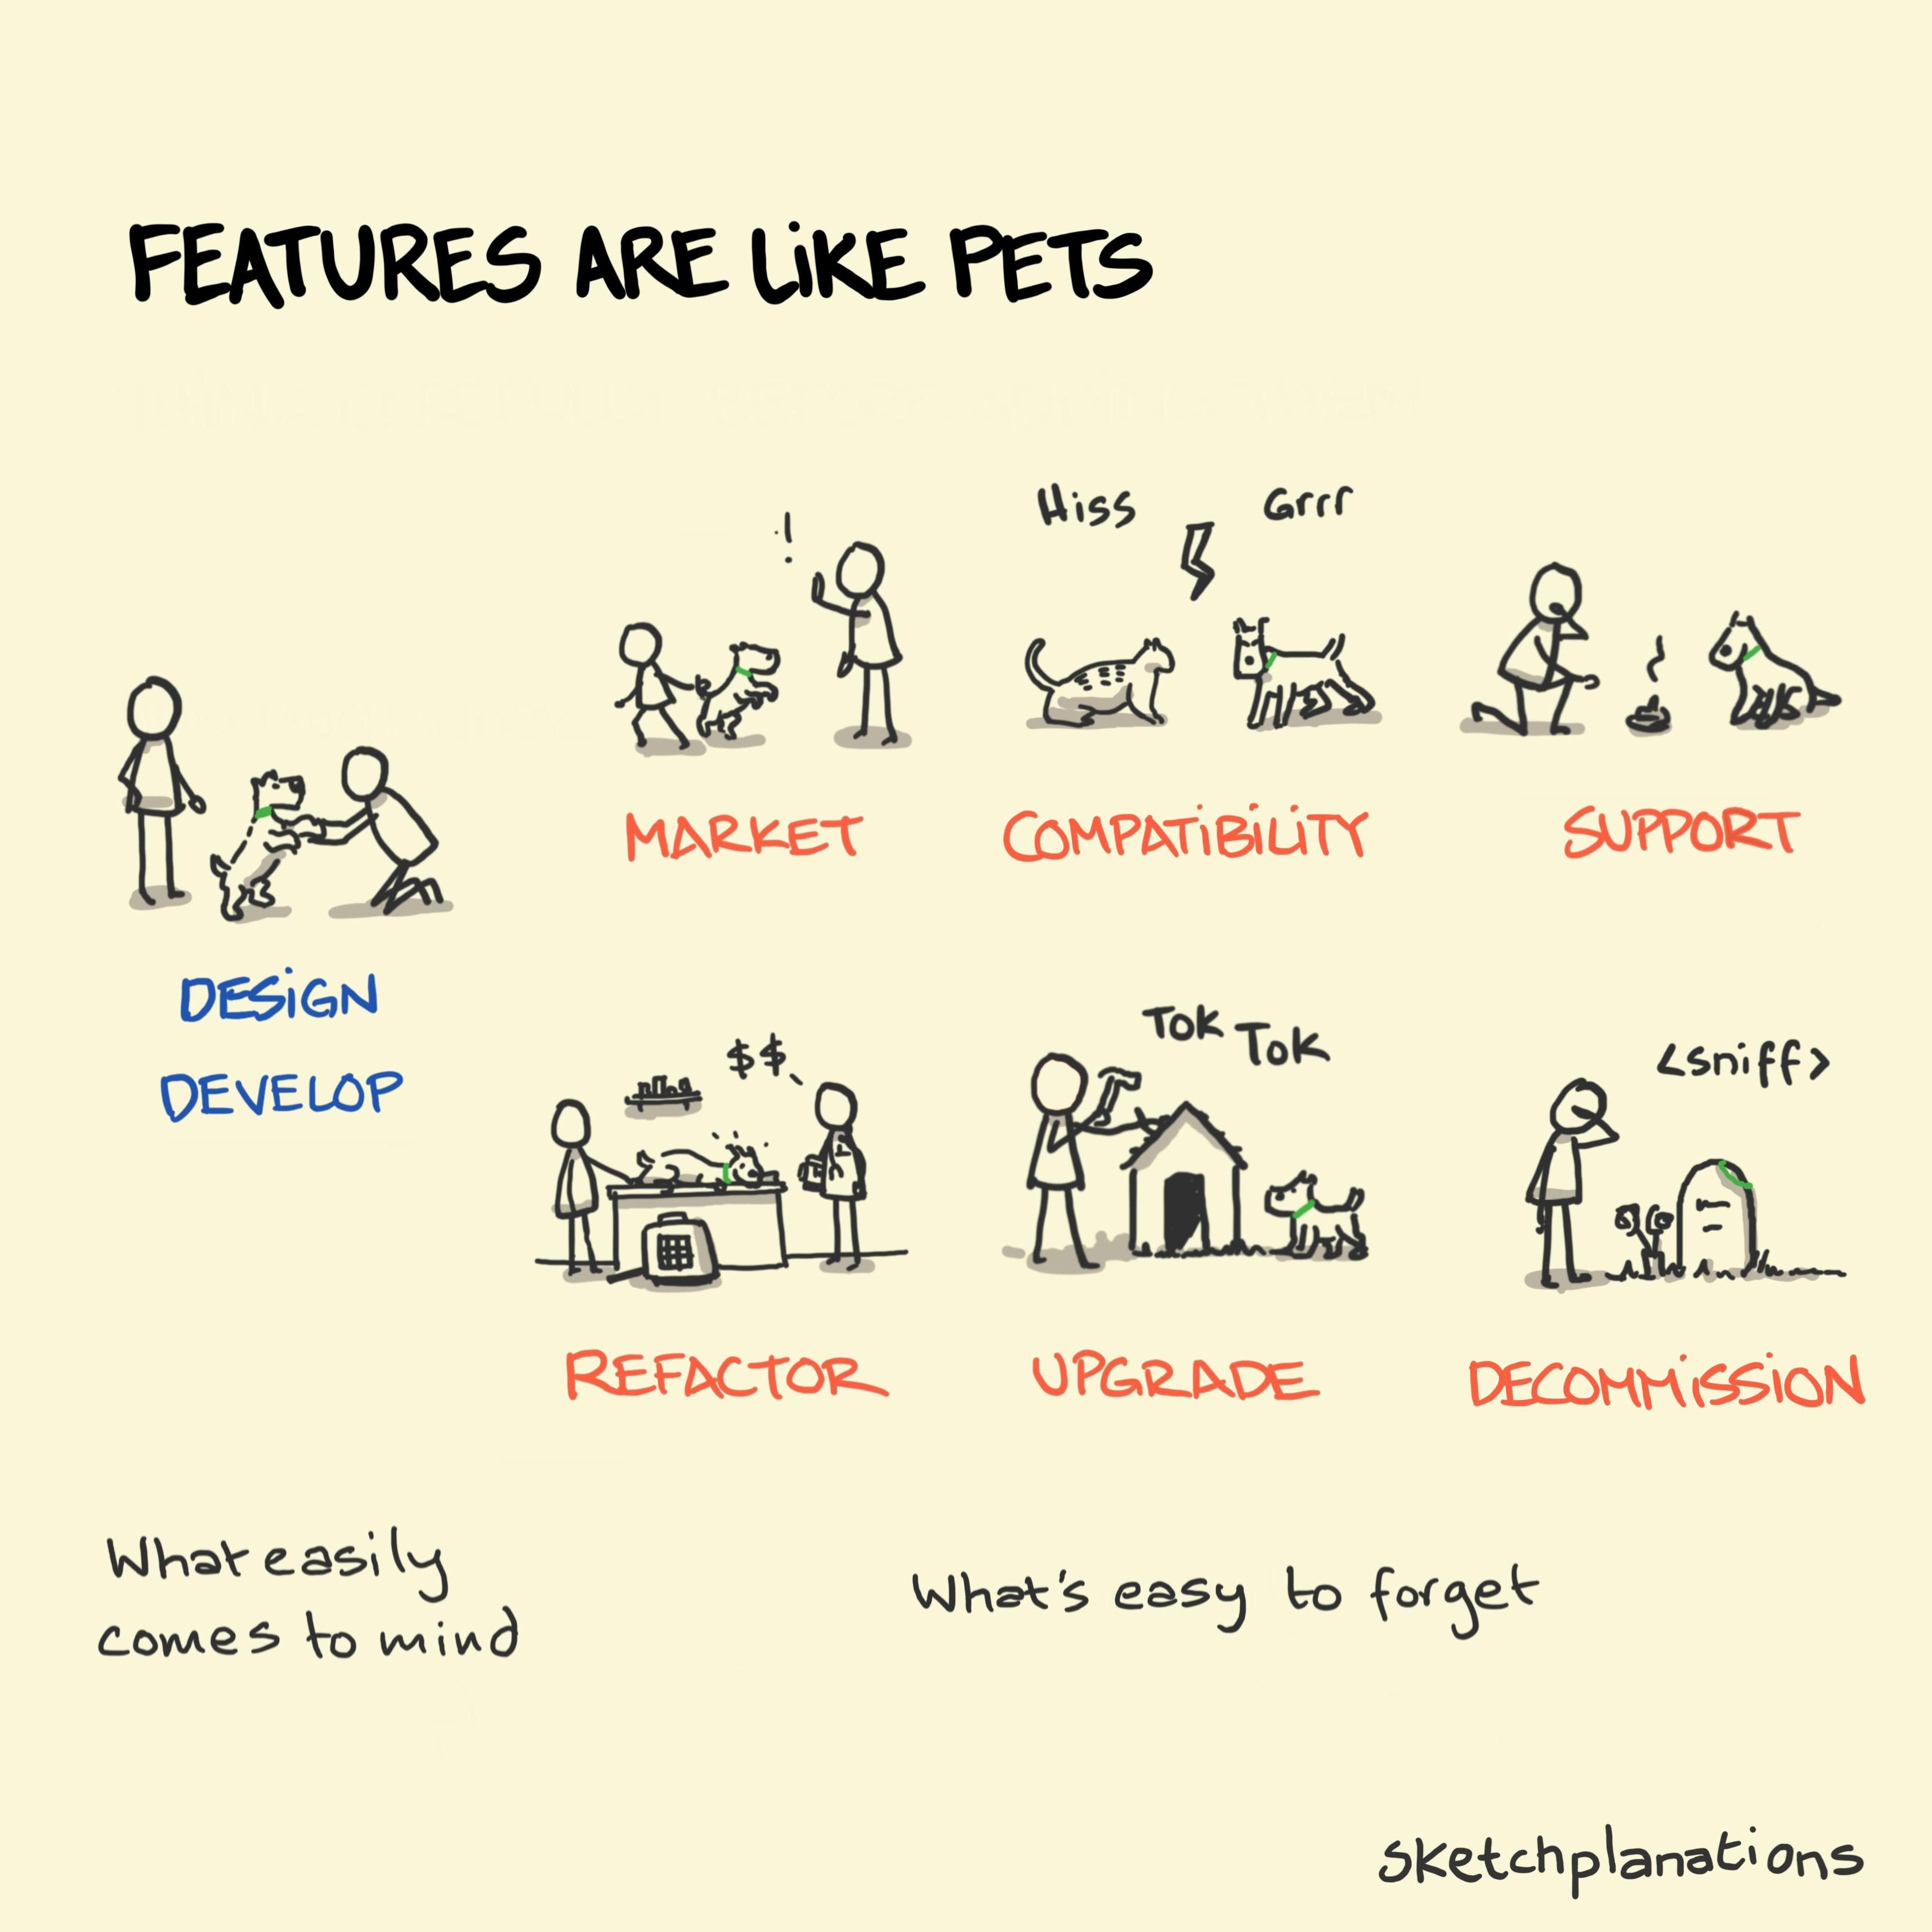 Features are like pets illustration: a series of images shows different practical roles and responsibilities involved with owning a pet dog, compared with a solo image of how simple and rewarding one might imagine it to be - all presented as a simile for the time, effort and cost involved in developing new software features.